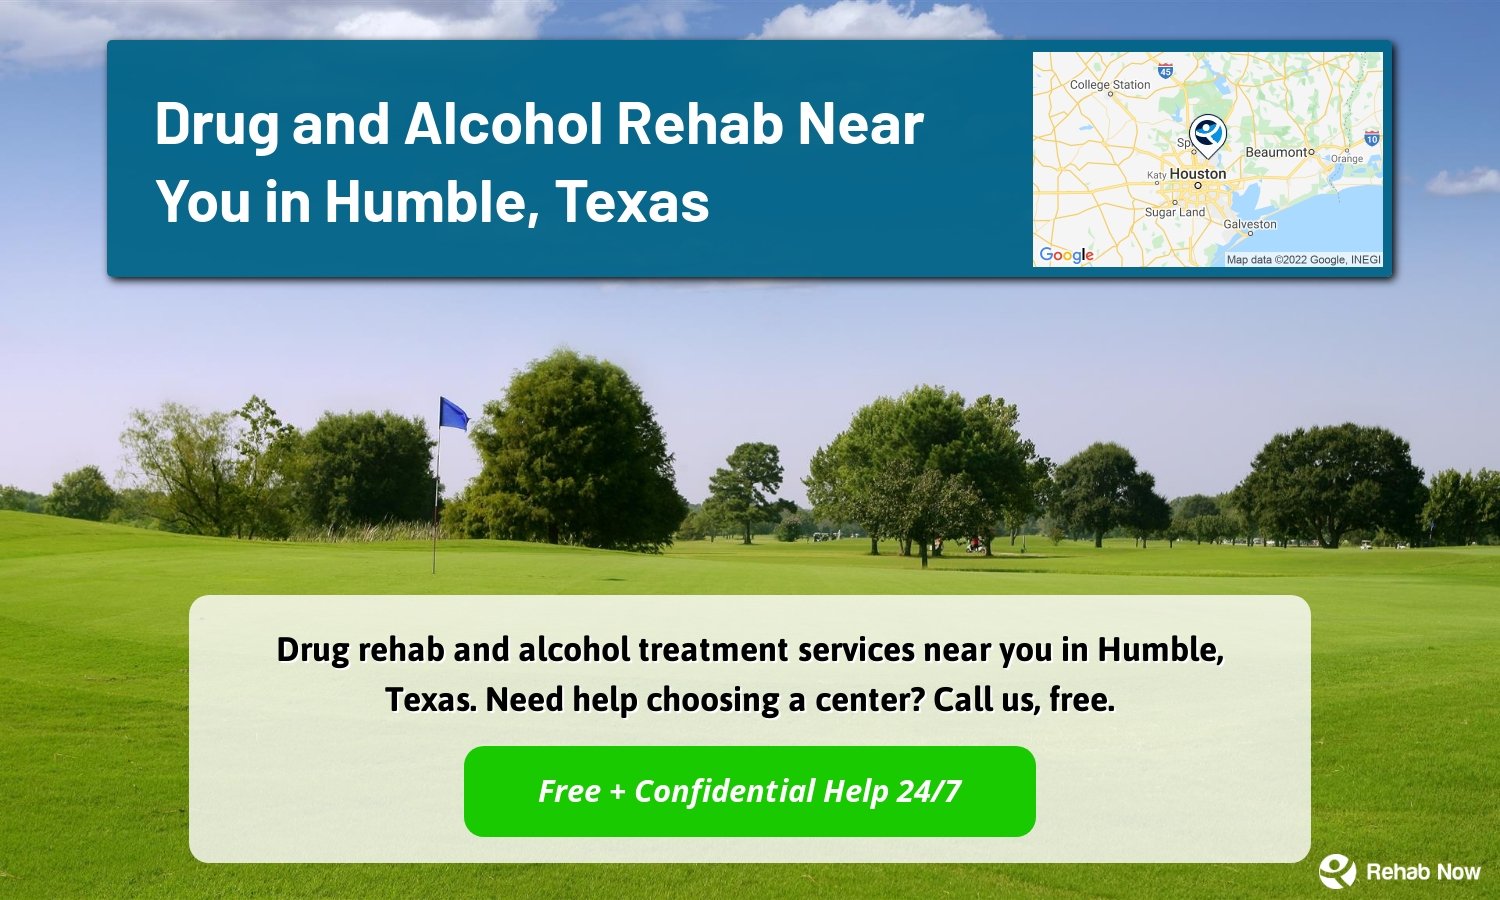 Drug rehab and alcohol treatment services near you in Humble, Texas. Need help choosing a center? Call us, free.